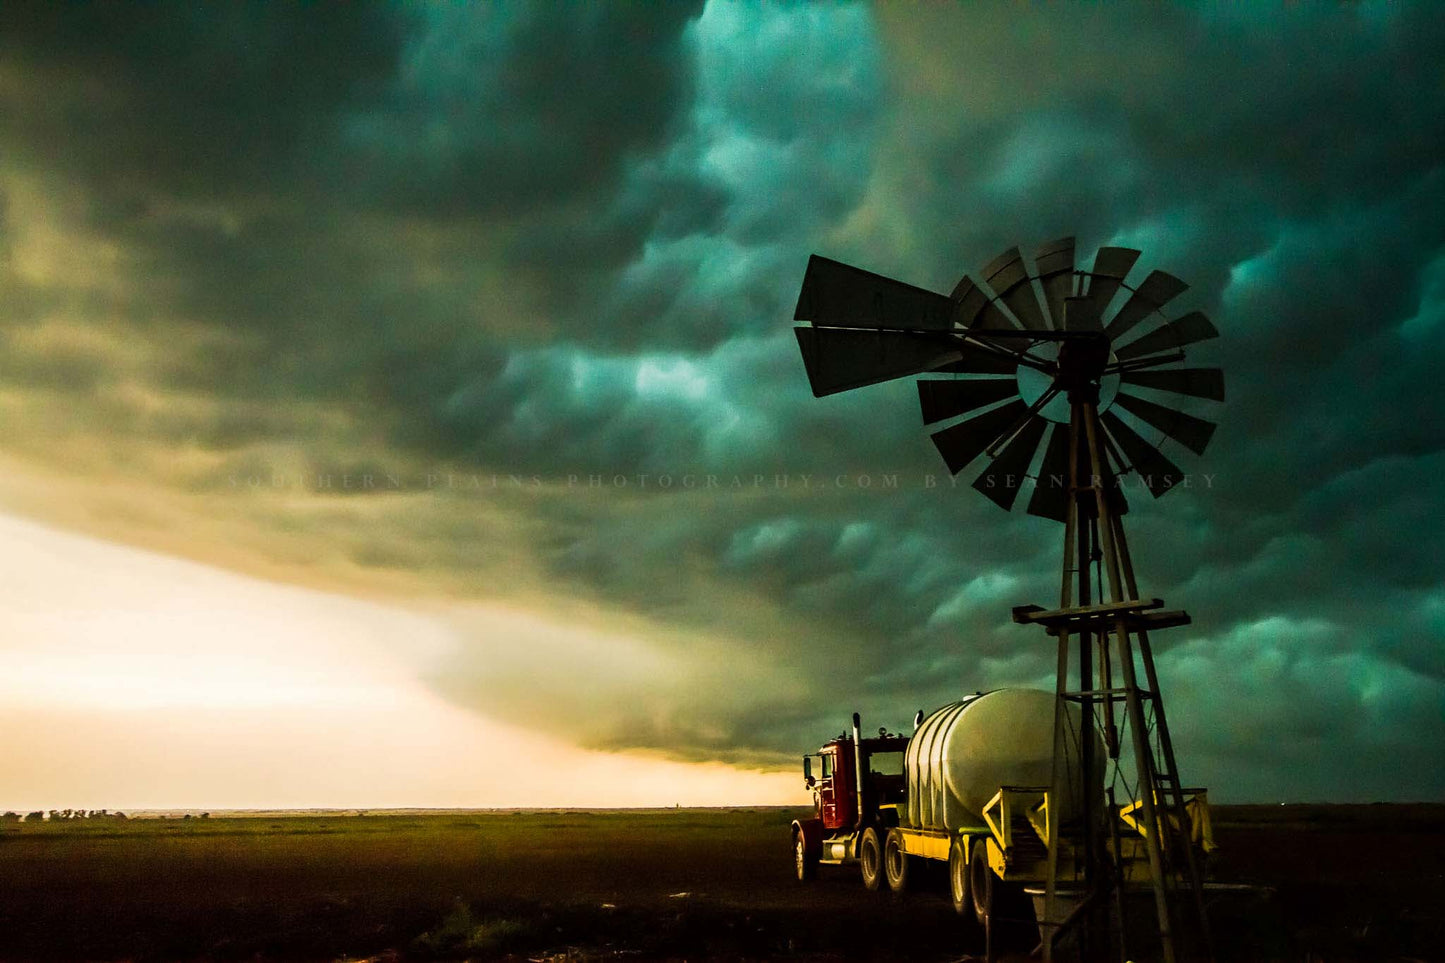 Moody country photography print of a thunderstorm advancing over an old windmill and truck on a stormy summer day on the plains of Oklahoma by Sean Ramsey of Southern Plains Photography.